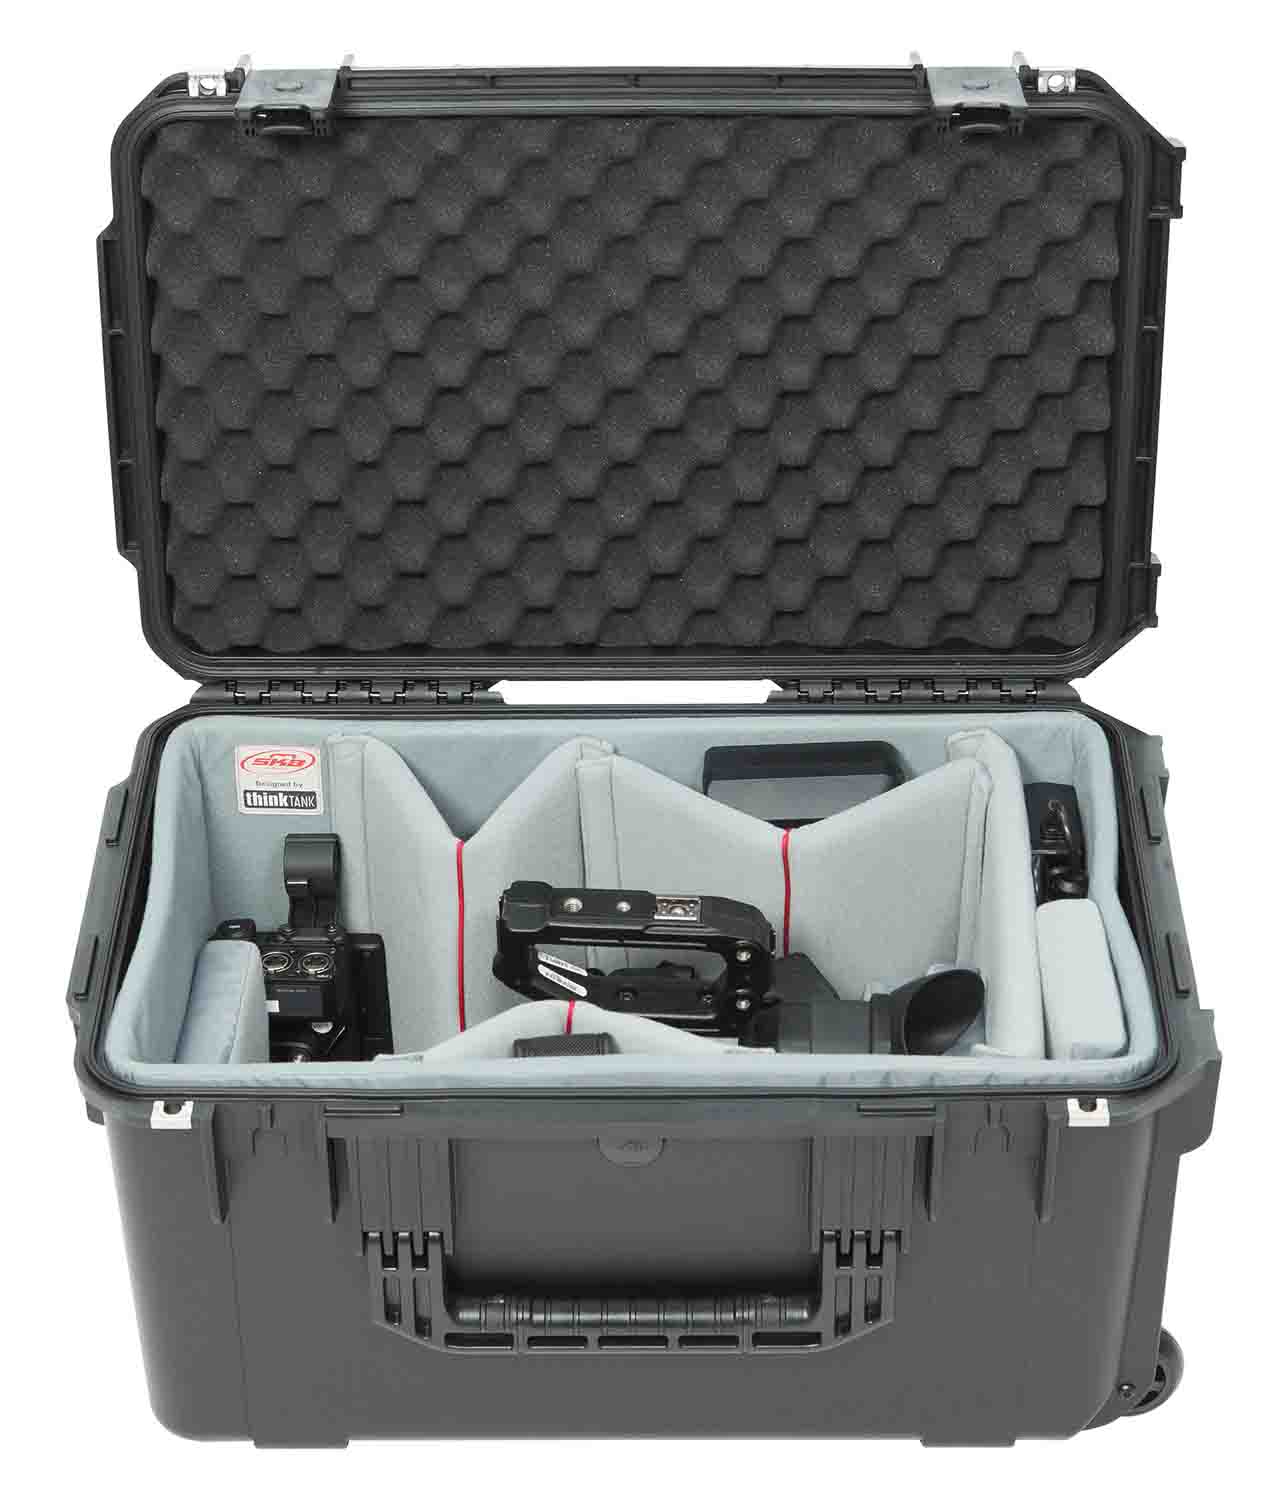 SKB Cases 3i-2213-12DT Case with Think Tank Video Dividers and Lid Foam - Black - Hollywood DJ